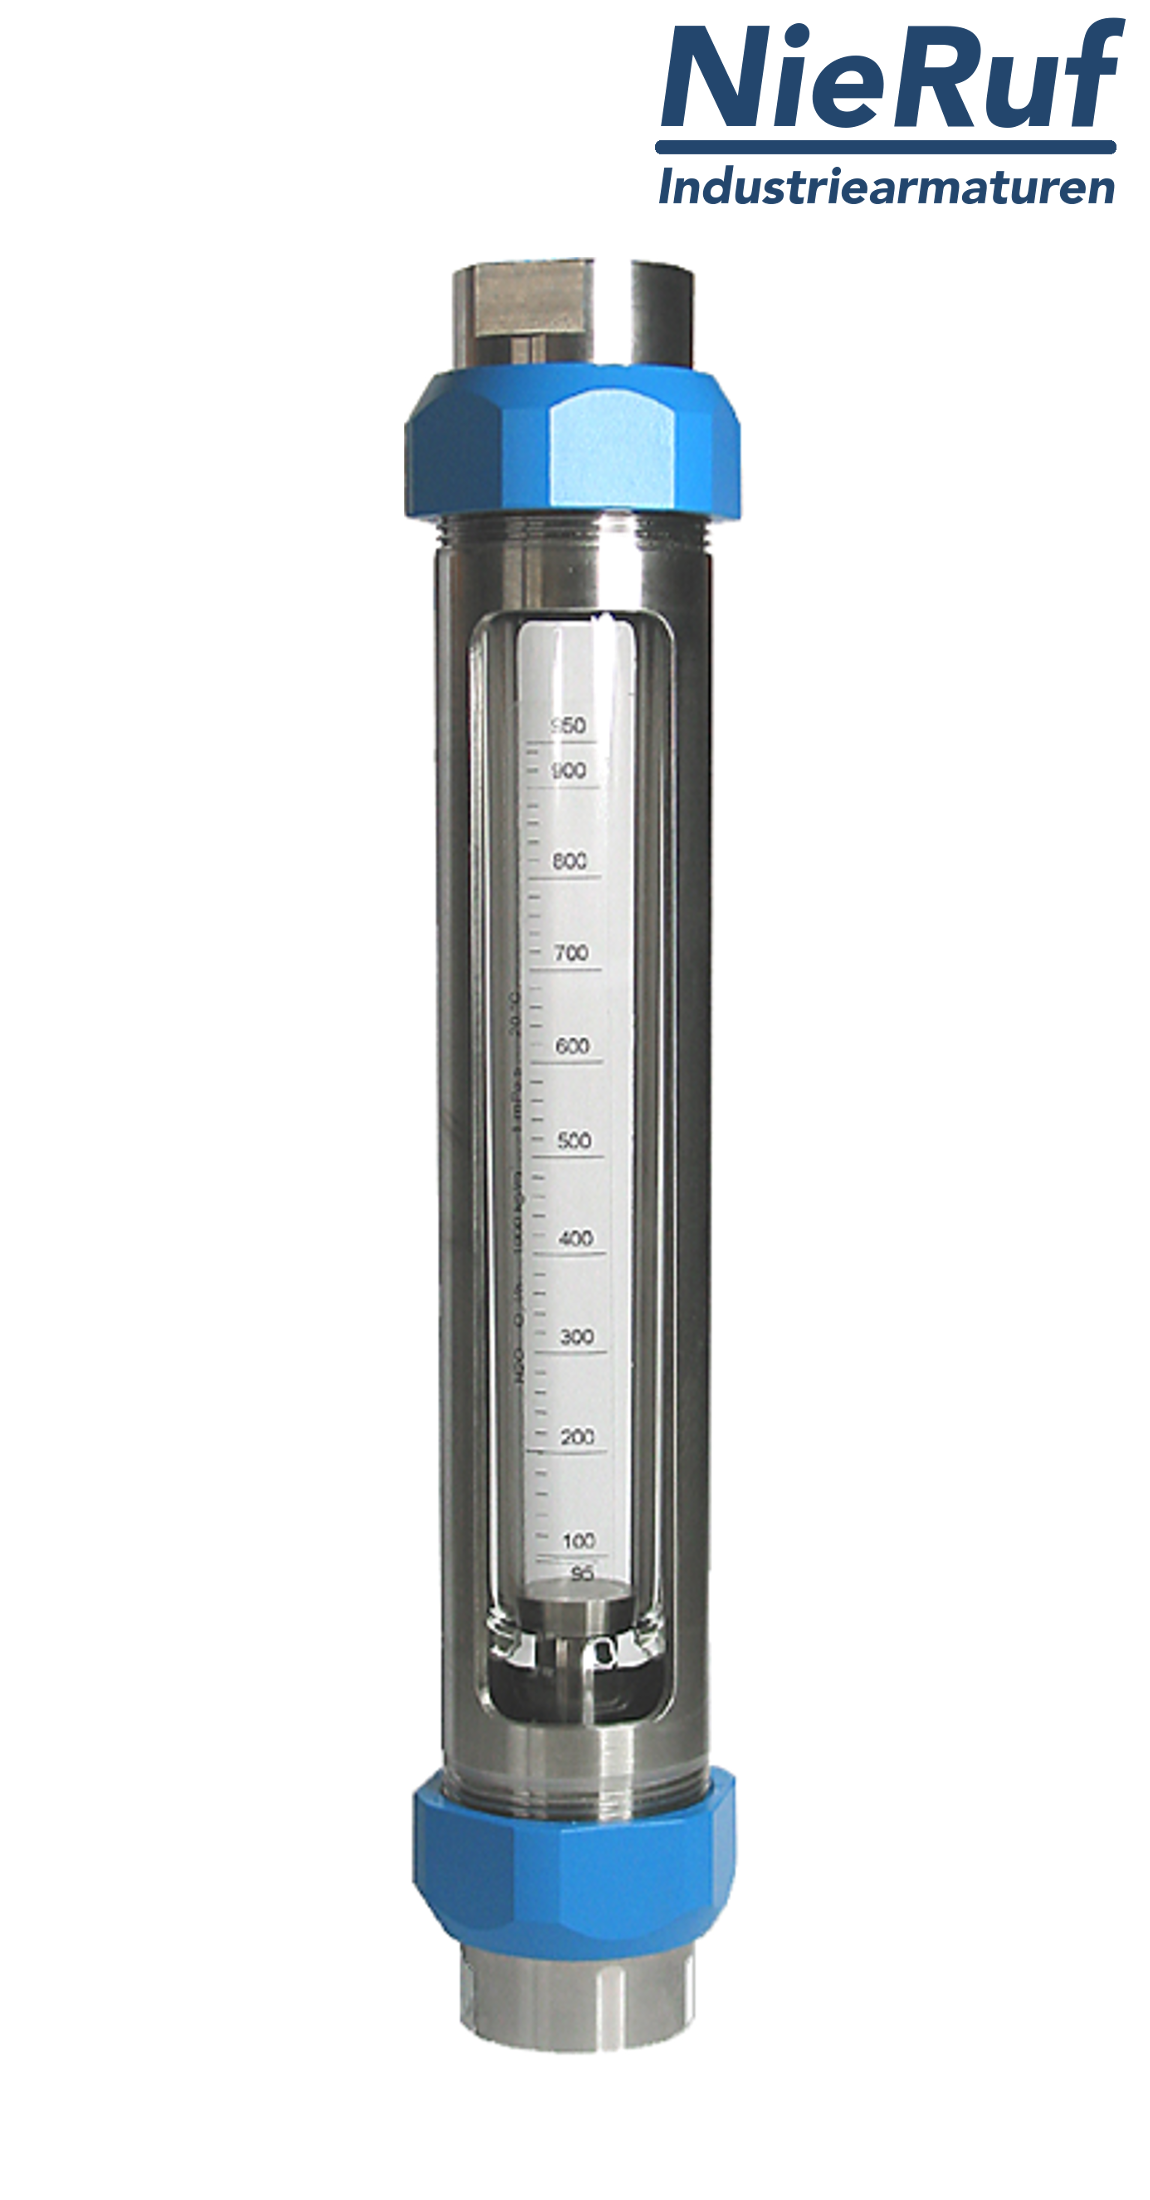 Variable area flowmeter stainless steel + borosilicate 1/2" inch 160.0 - 1600 l/h water FKM